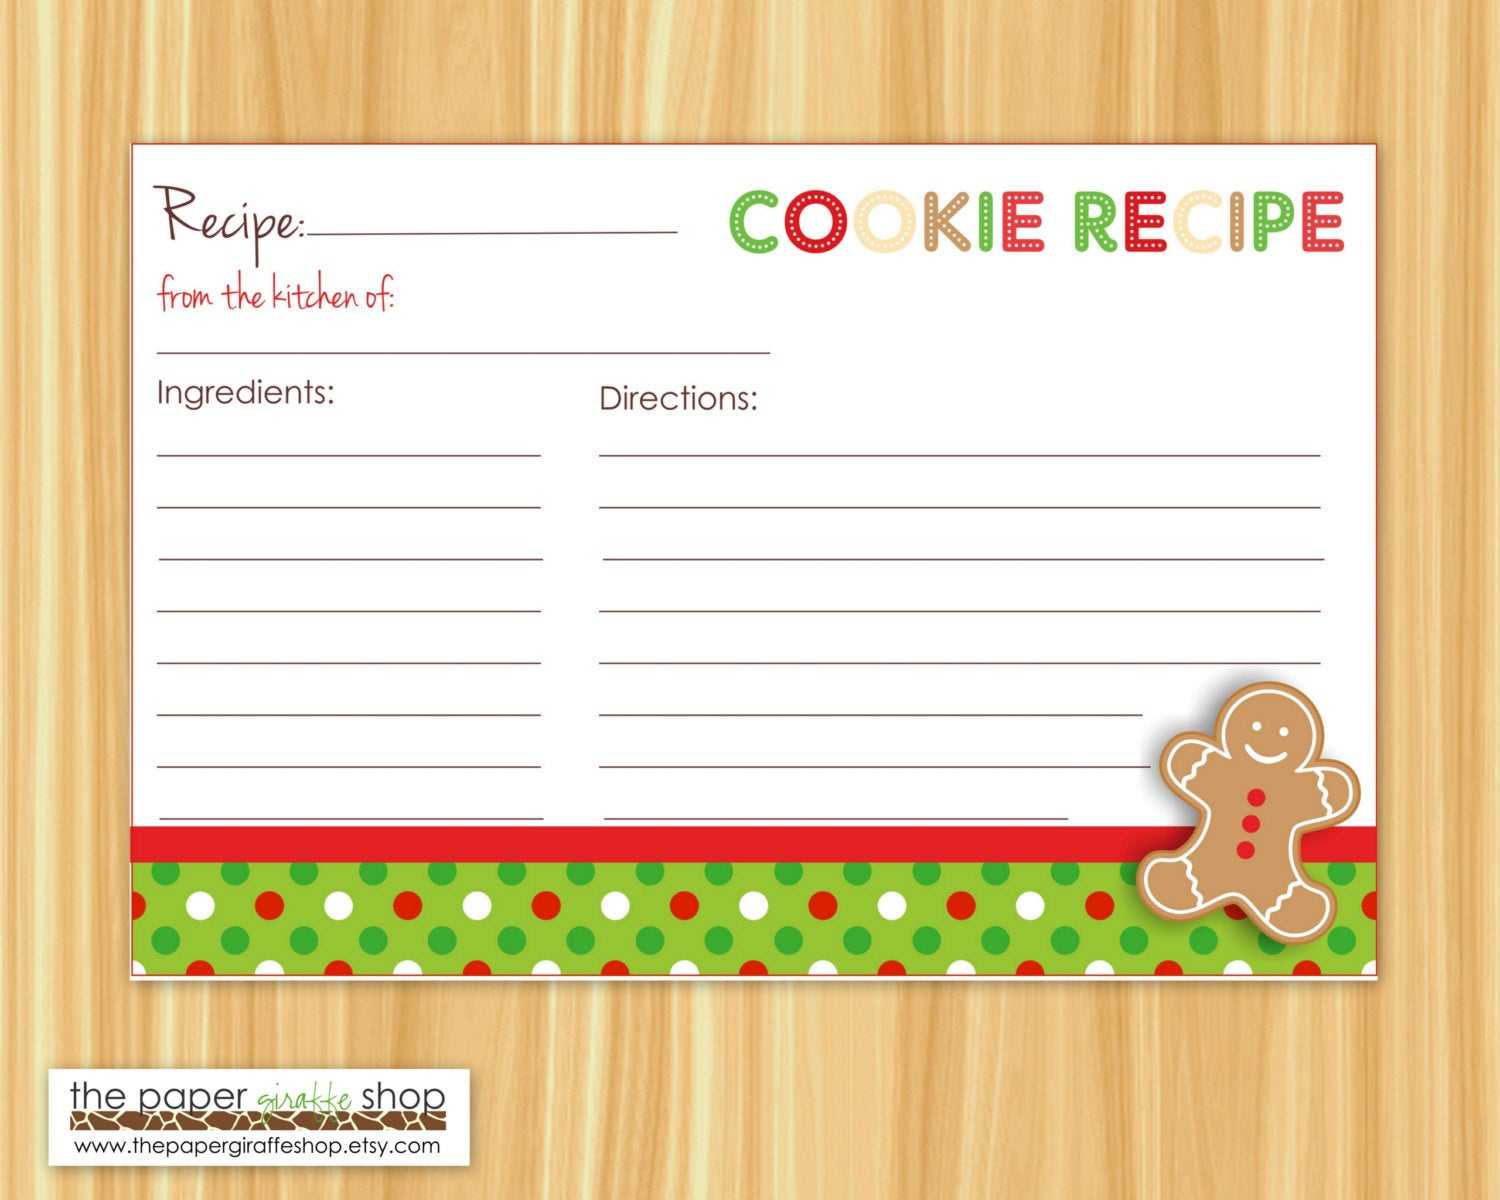 Cookie Exchange Recipe Card Template - Atlantaauctionco With Cookie Exchange Recipe Card Template